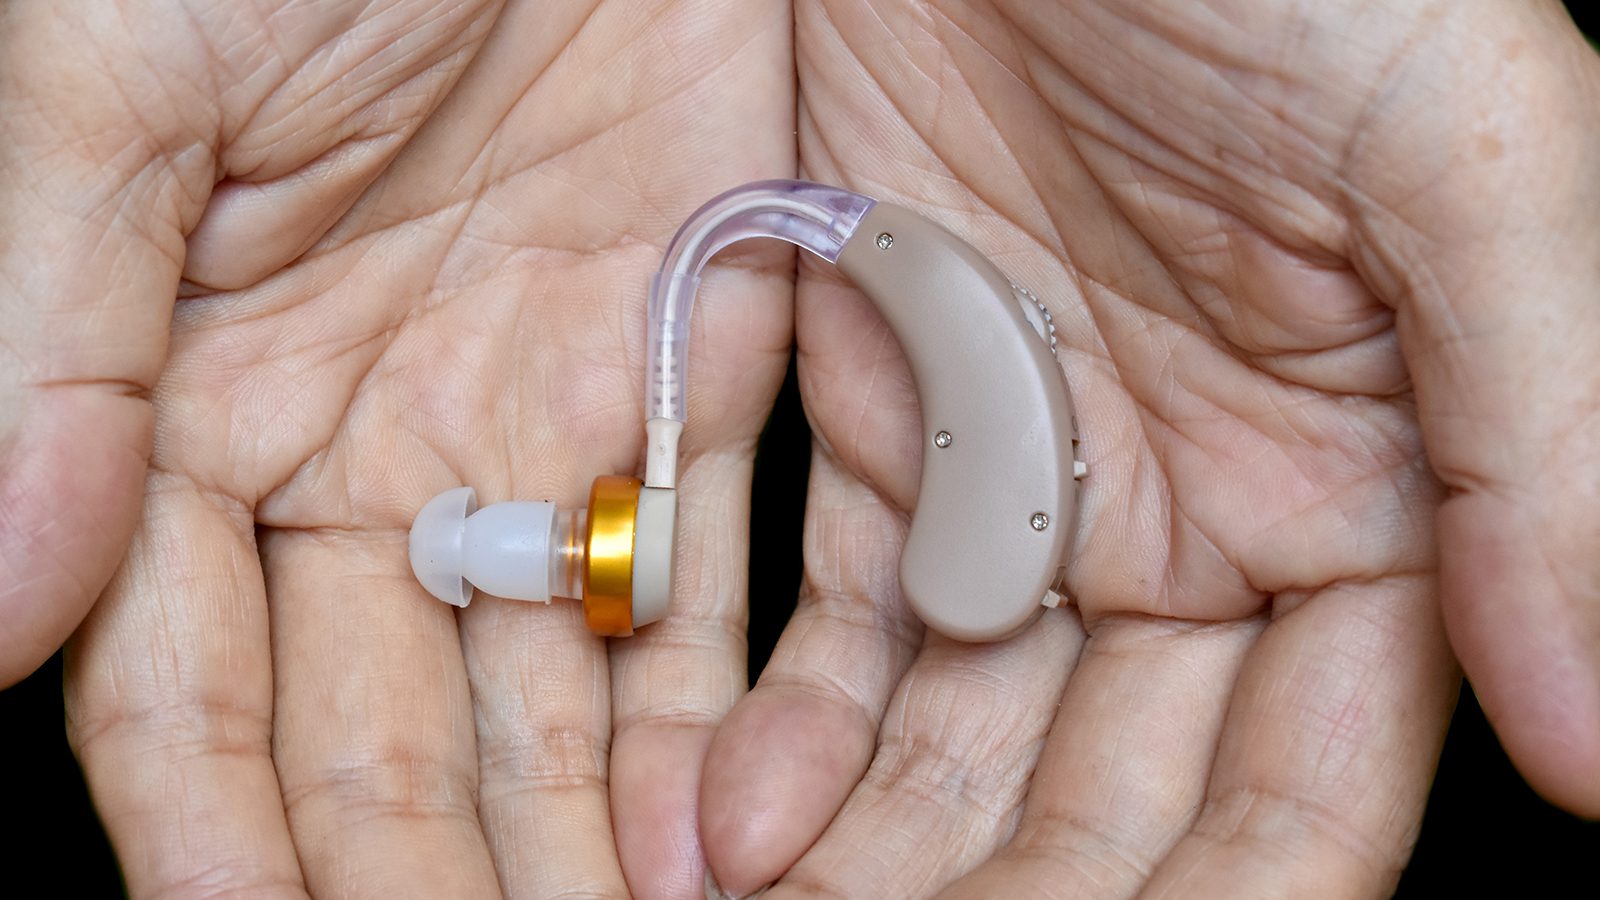 FDA Makes Hearing Aids Available Over the Counter